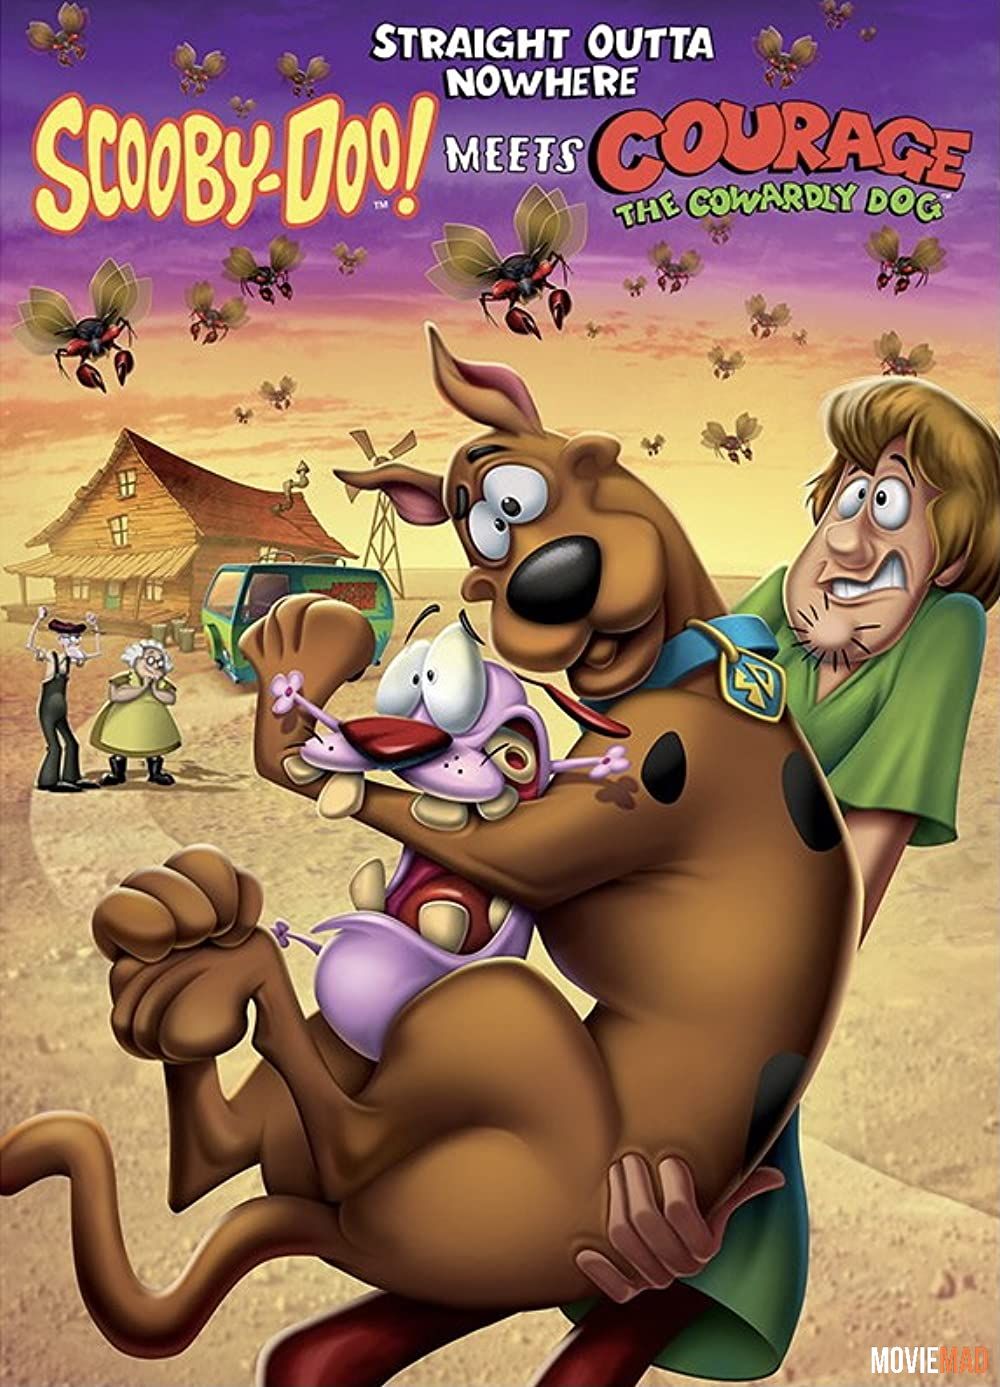 full moviesStraight Outta Nowhere Scooby-Doo Meets Courage the Cowardly Dog 2021 English HDRip Full Movie 720p 480p